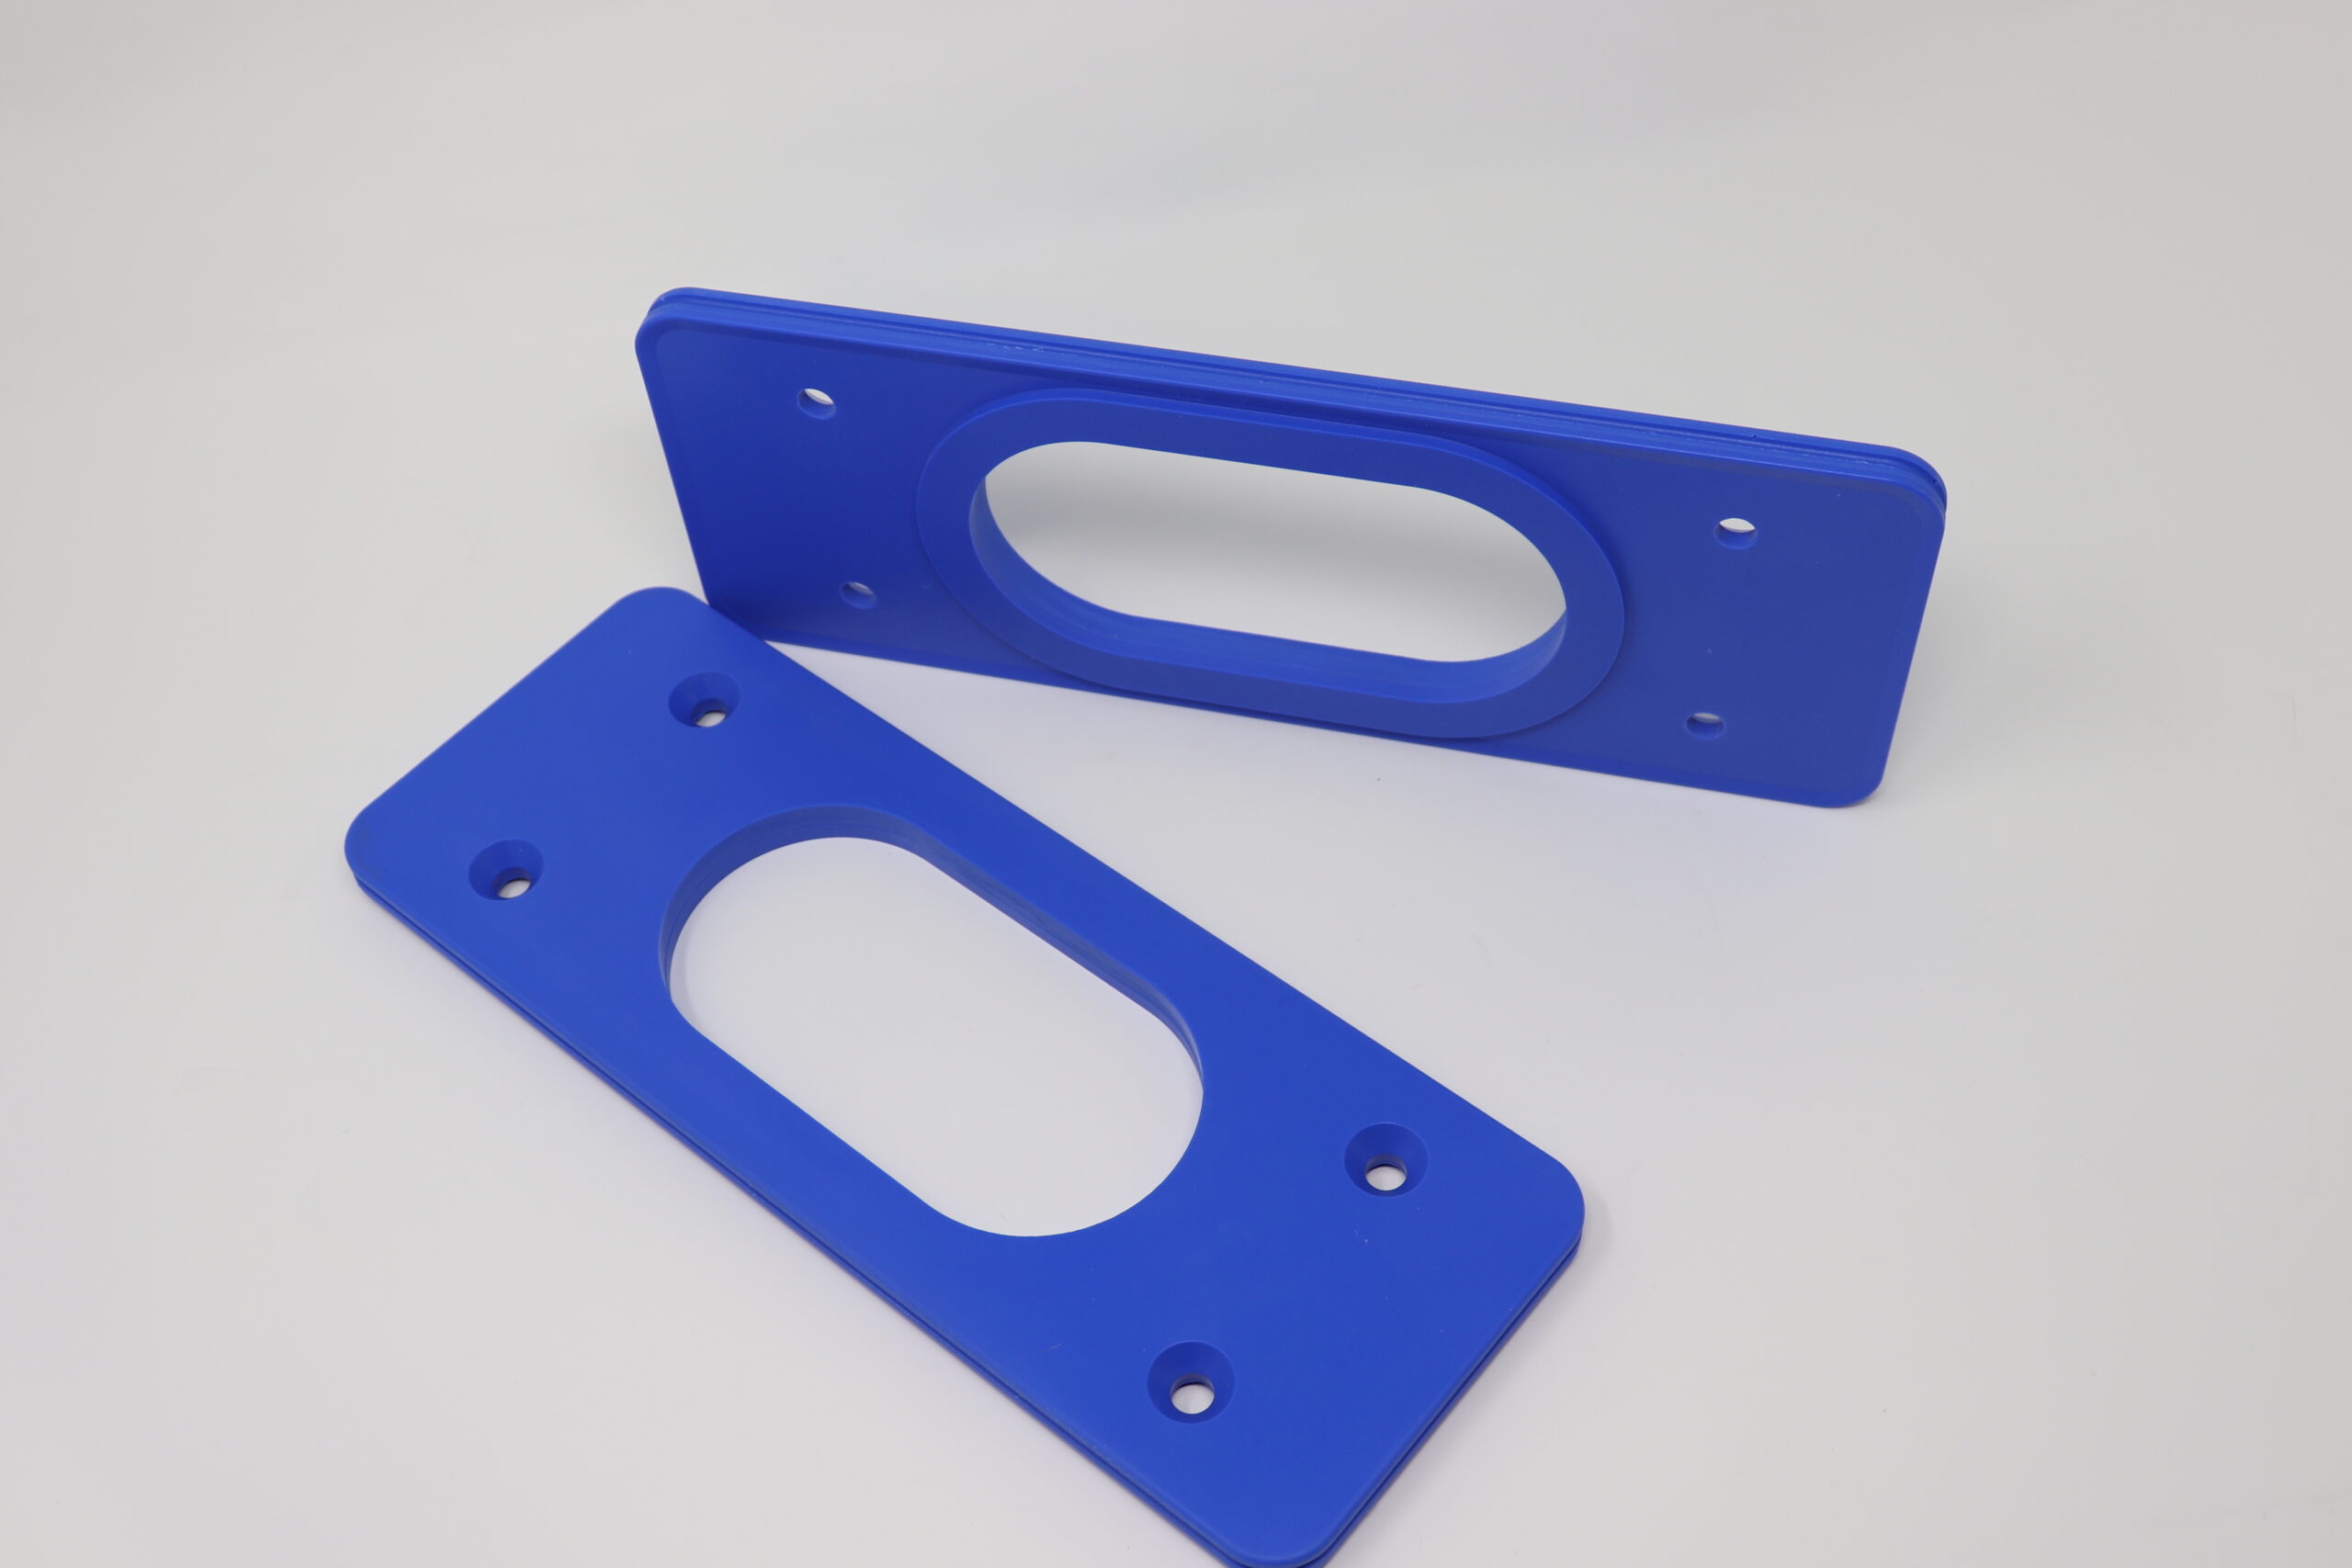 Blue molded plastic component